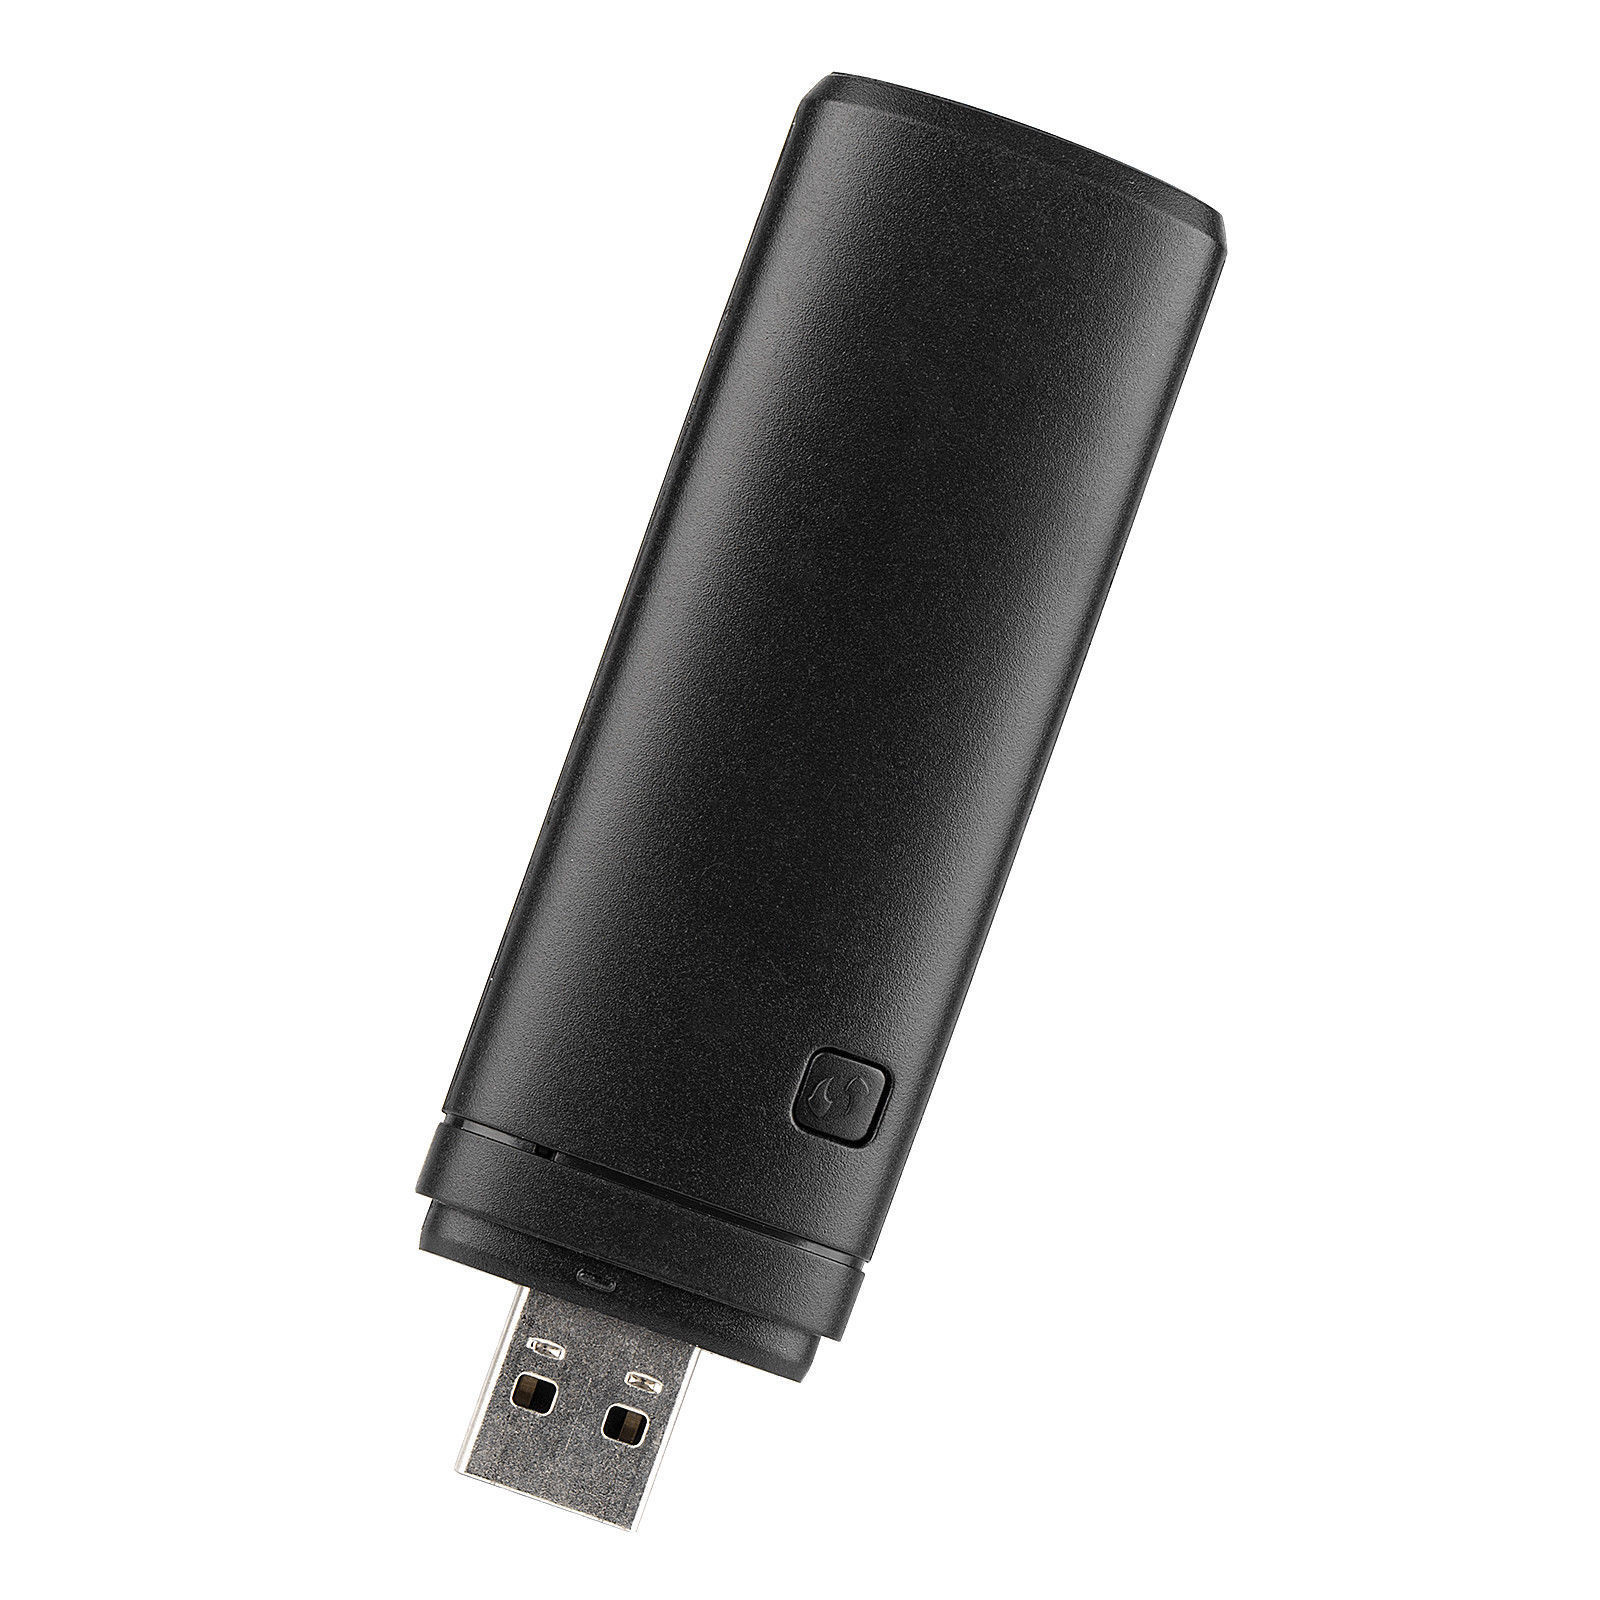 USB WiFi Adapter 300Mbps Fenvi N70 Wireless Dongle RT3572L for Samsung Smart TV 